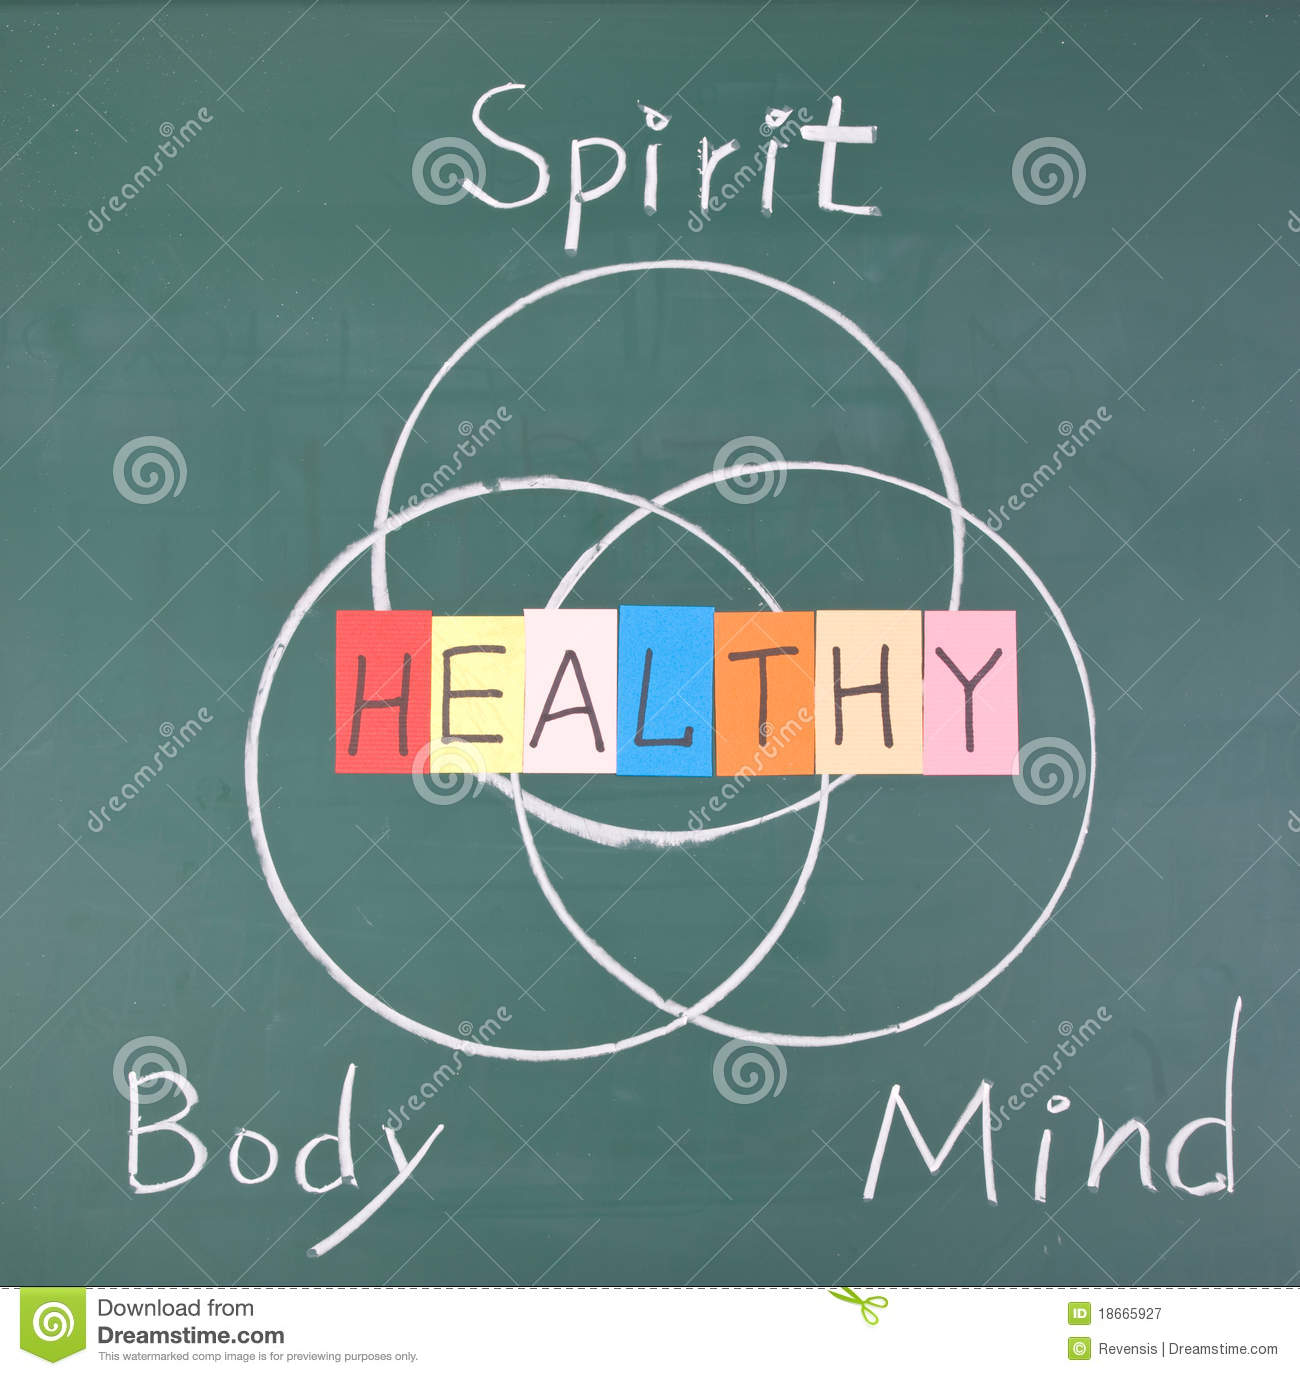 Healthy Concept Spirit Body And Mind Royalty Free Stock Photography